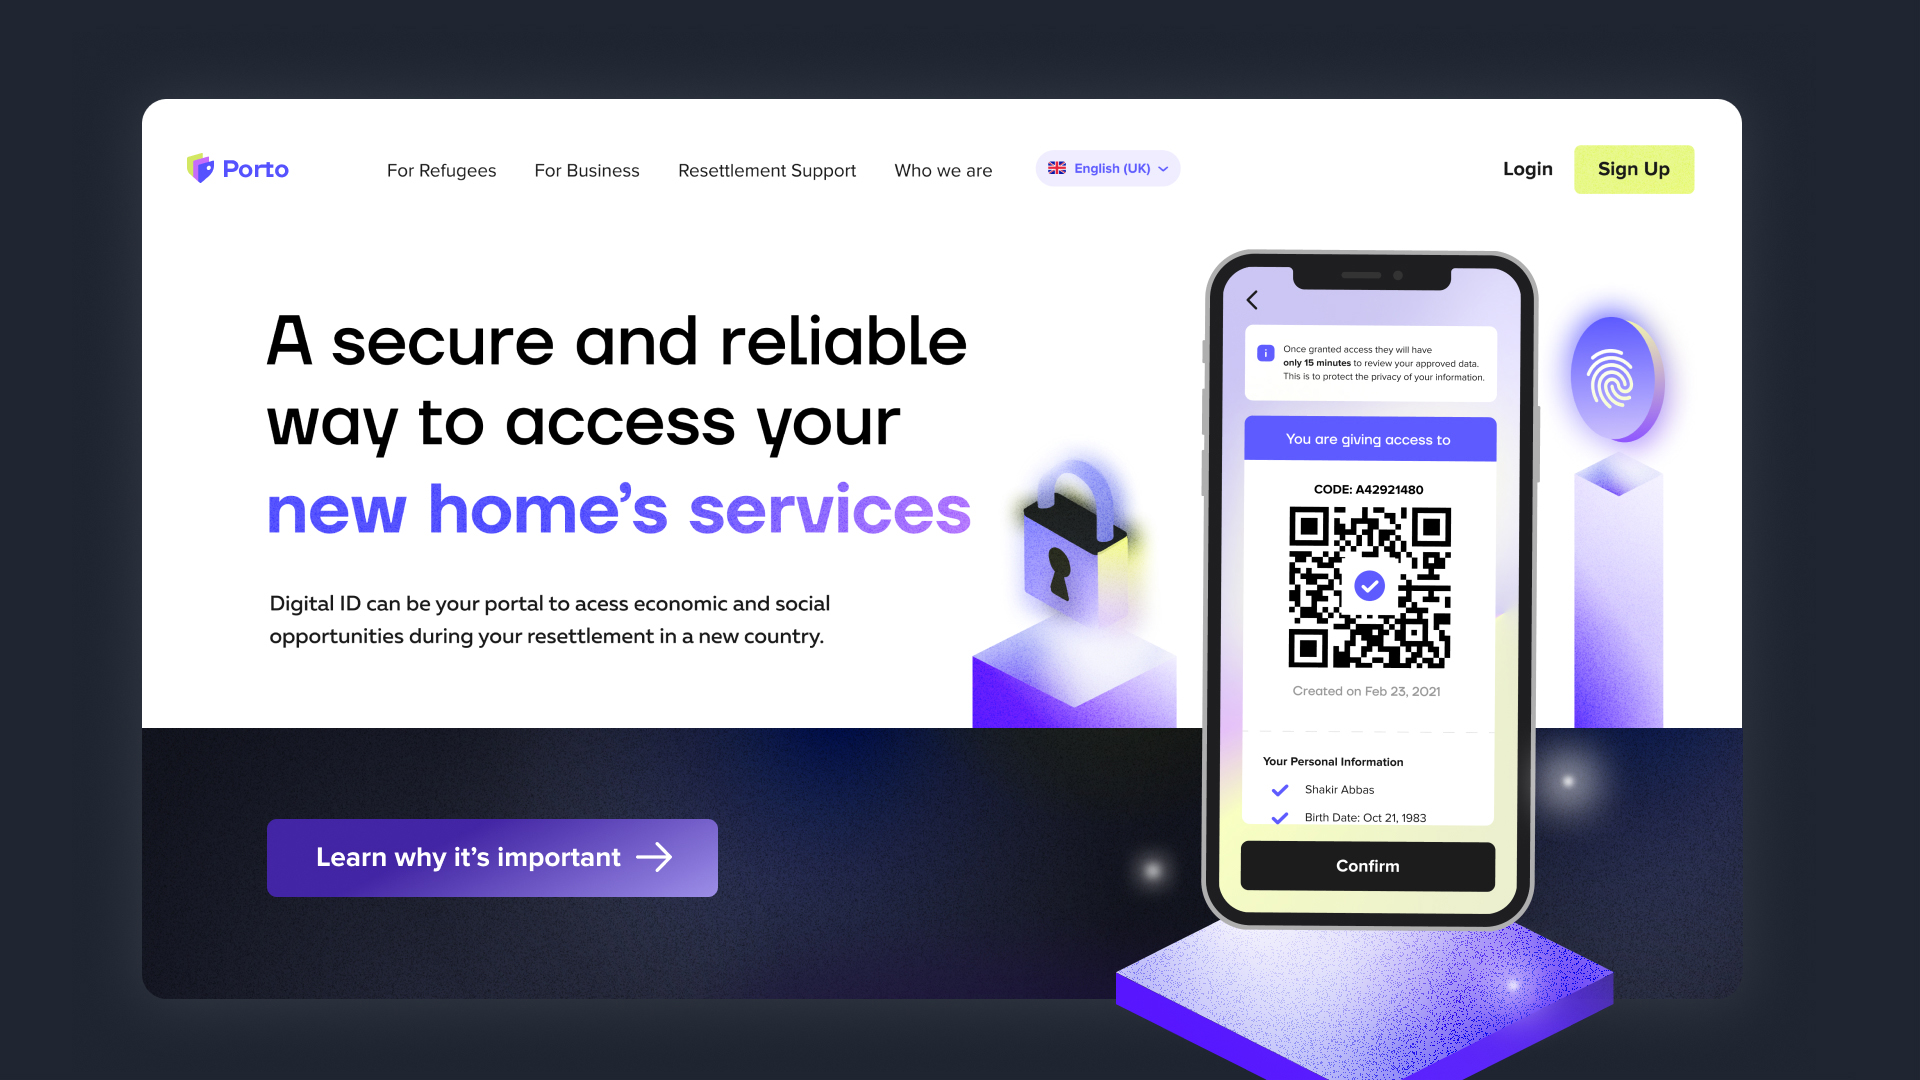 campaign website of porto, an app that enables refugees to participate in the economy of their next country of residence. website heading reads “a secure and reliable way to access your new home’s services